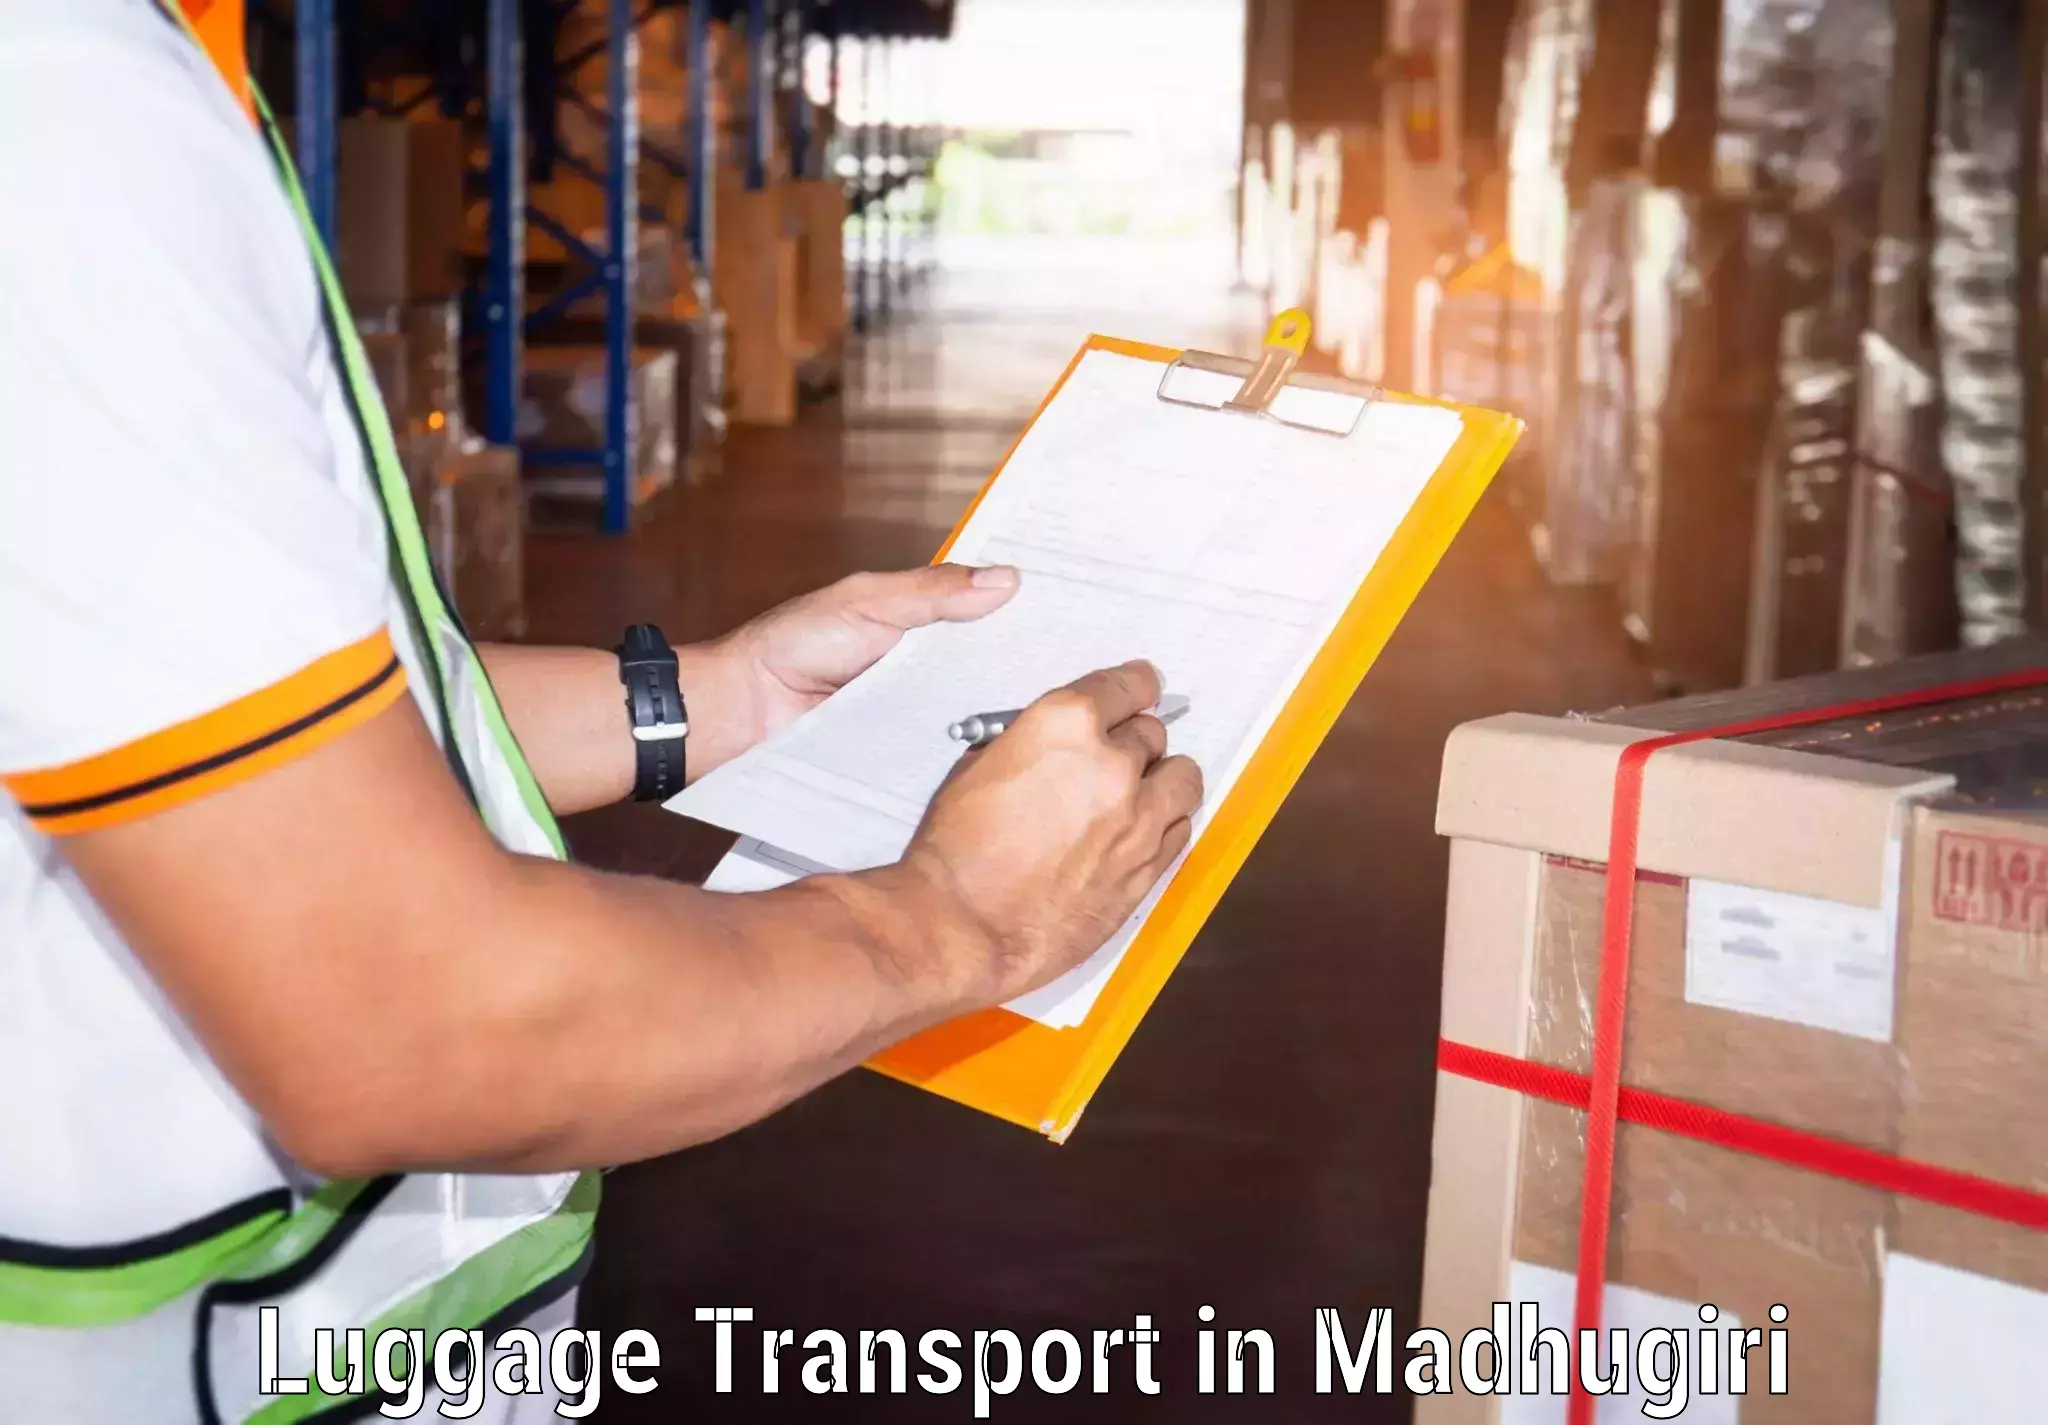 Luggage storage and delivery in Madhugiri